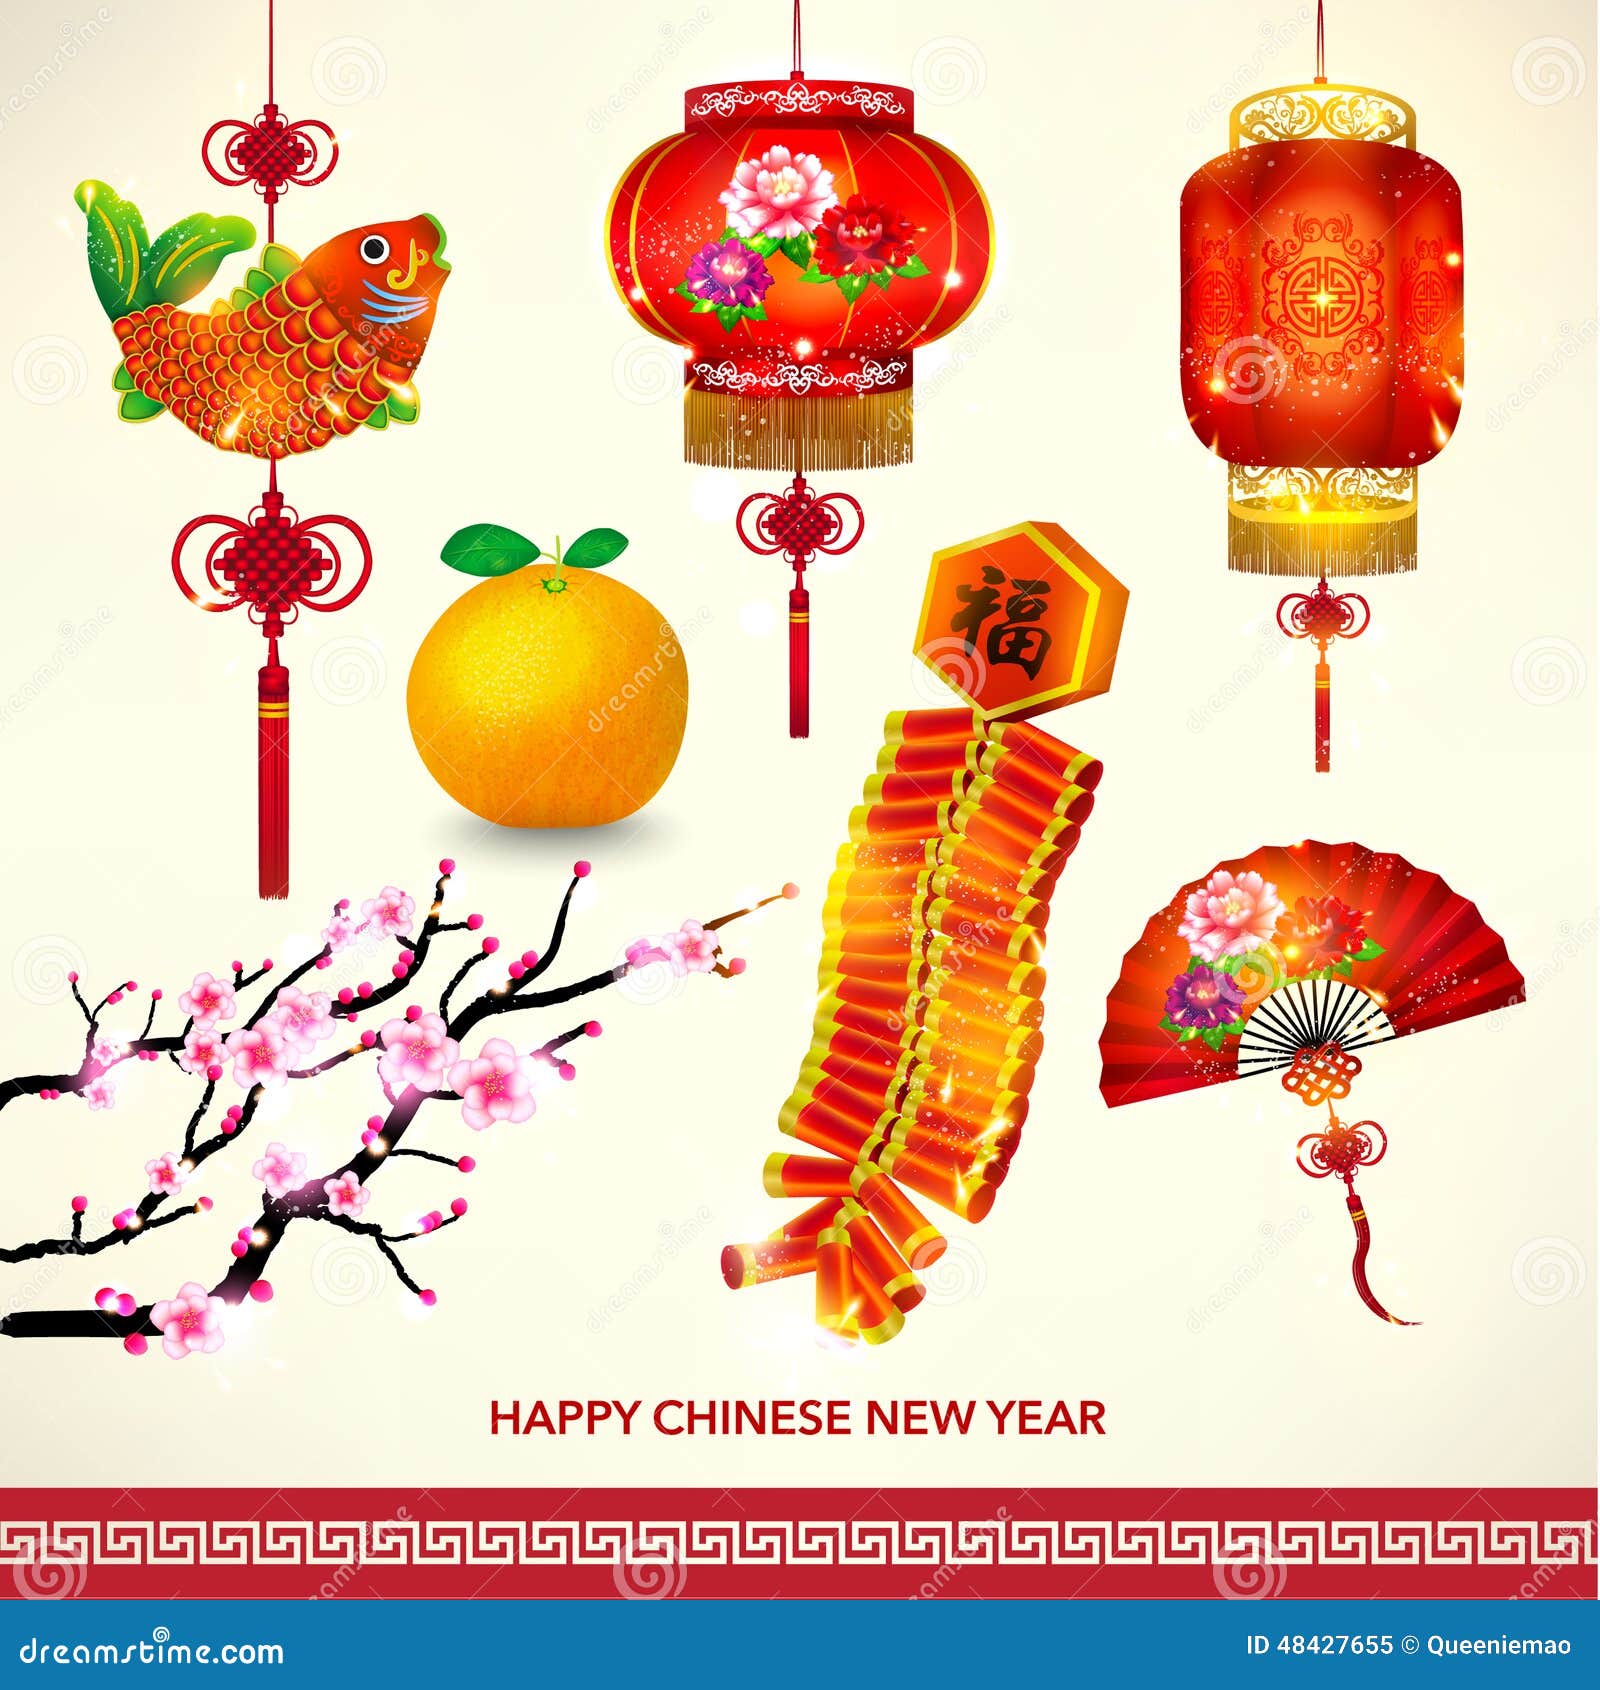 Happy Chinese New Year Decoration Set Stock Vector - Image ...